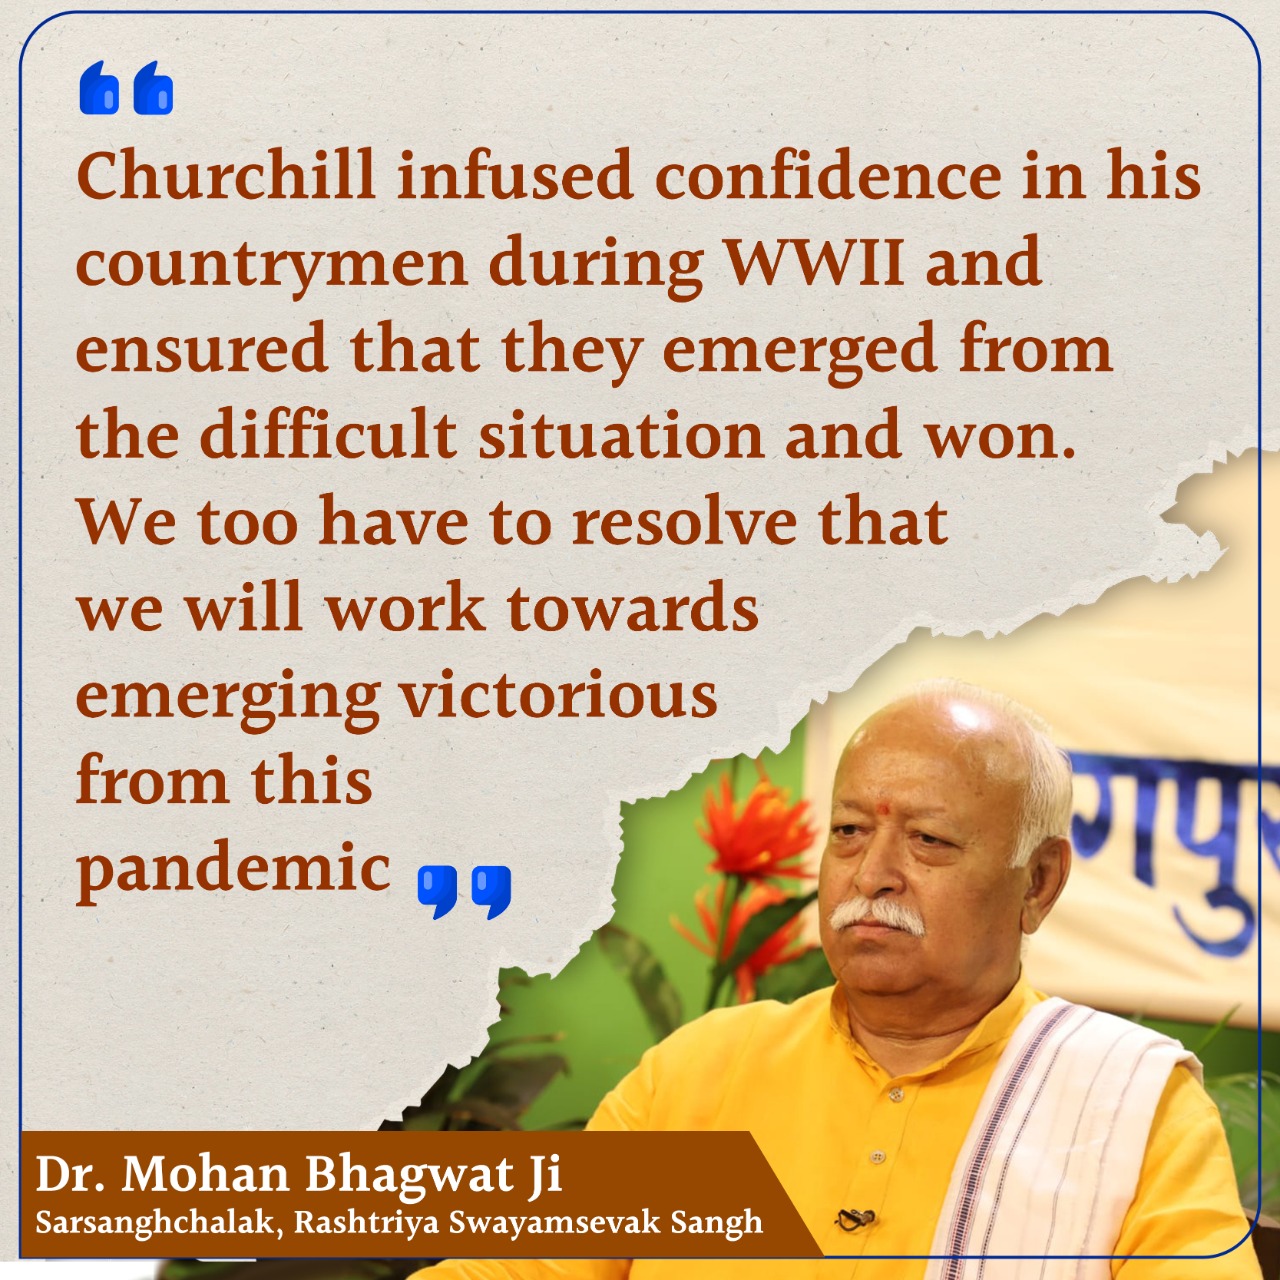 With determination, alertness, patience and collective efforts, the corona crisis will definitely be conquered – Dr. Mohan Bhagwat Ji